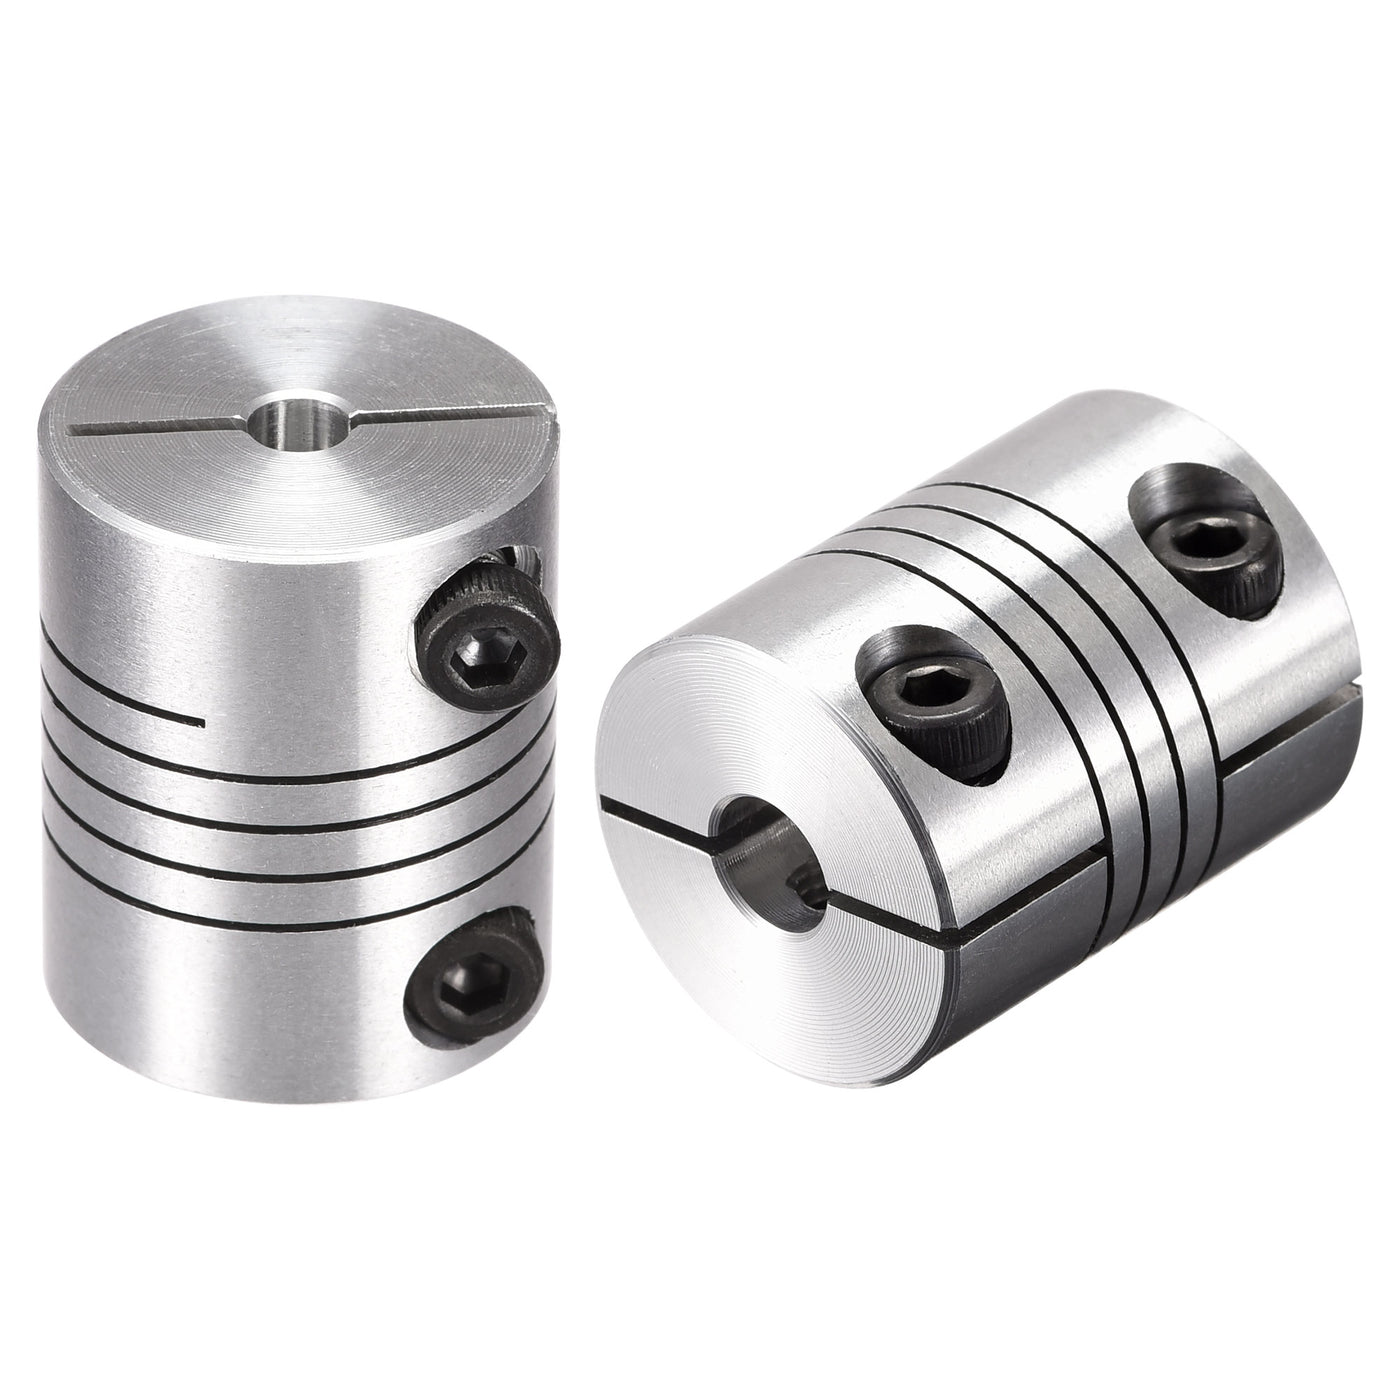 uxcell Uxcell 2PCS Motor Shaft 4mm to 6mm Helical Beam Coupler Coupling 20mm Dia 25mm Length